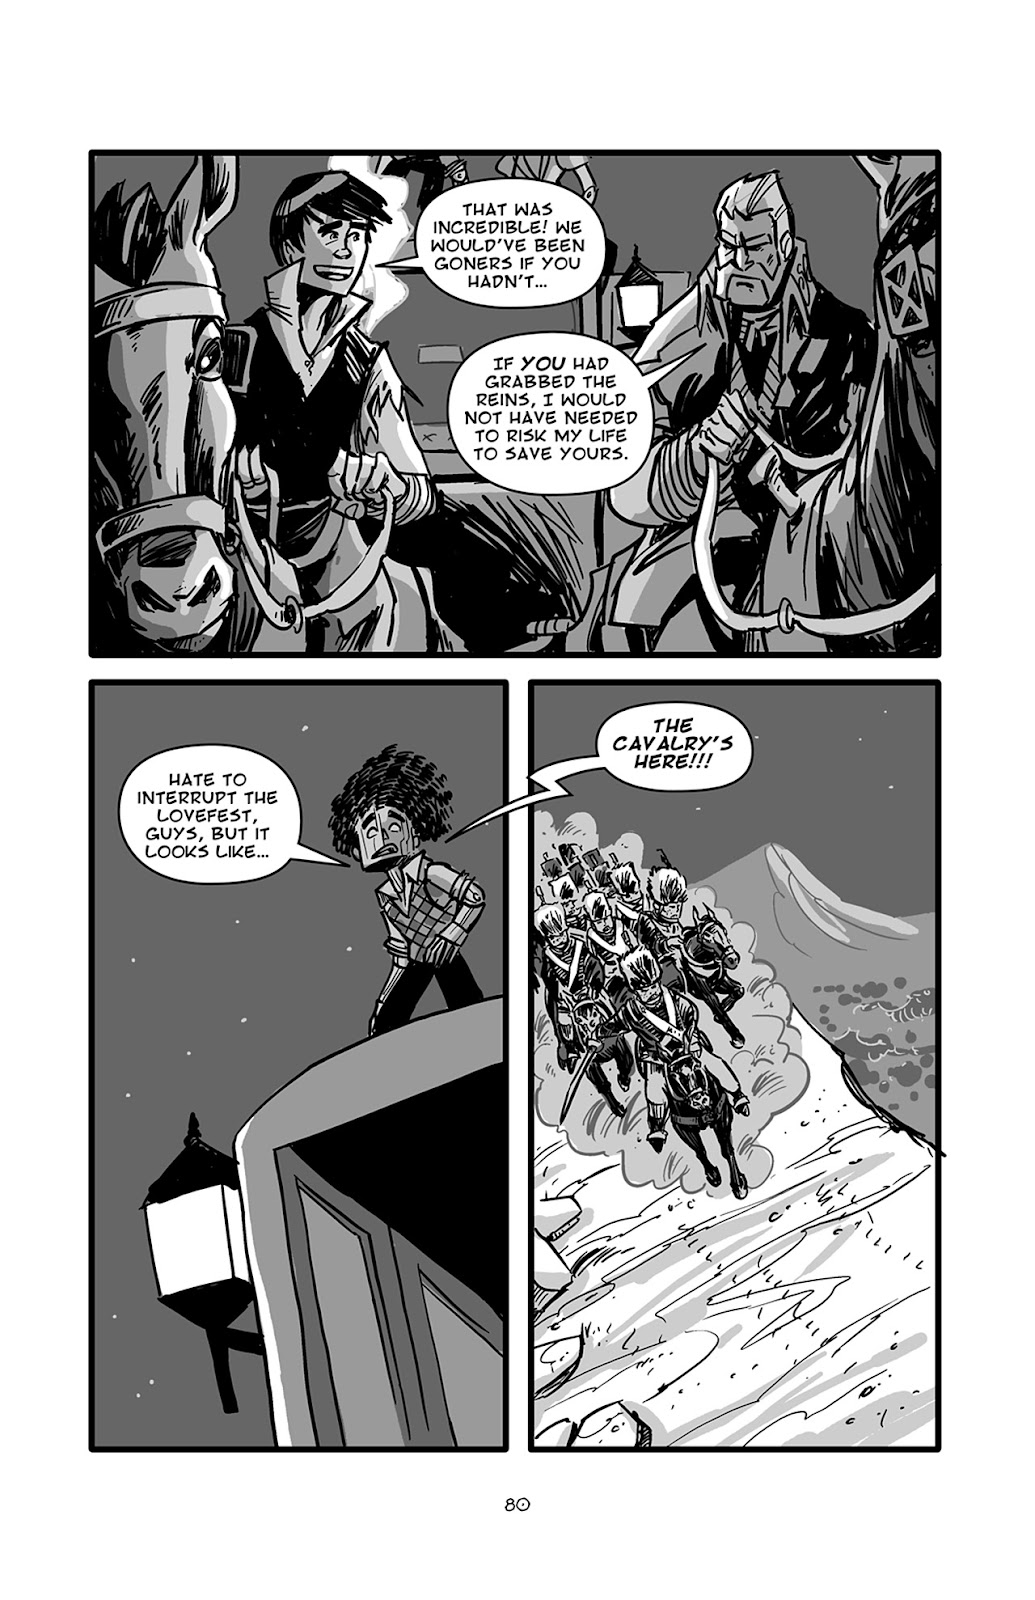 Pinocchio: Vampire Slayer - Of Wood and Blood issue 4 - Page 7